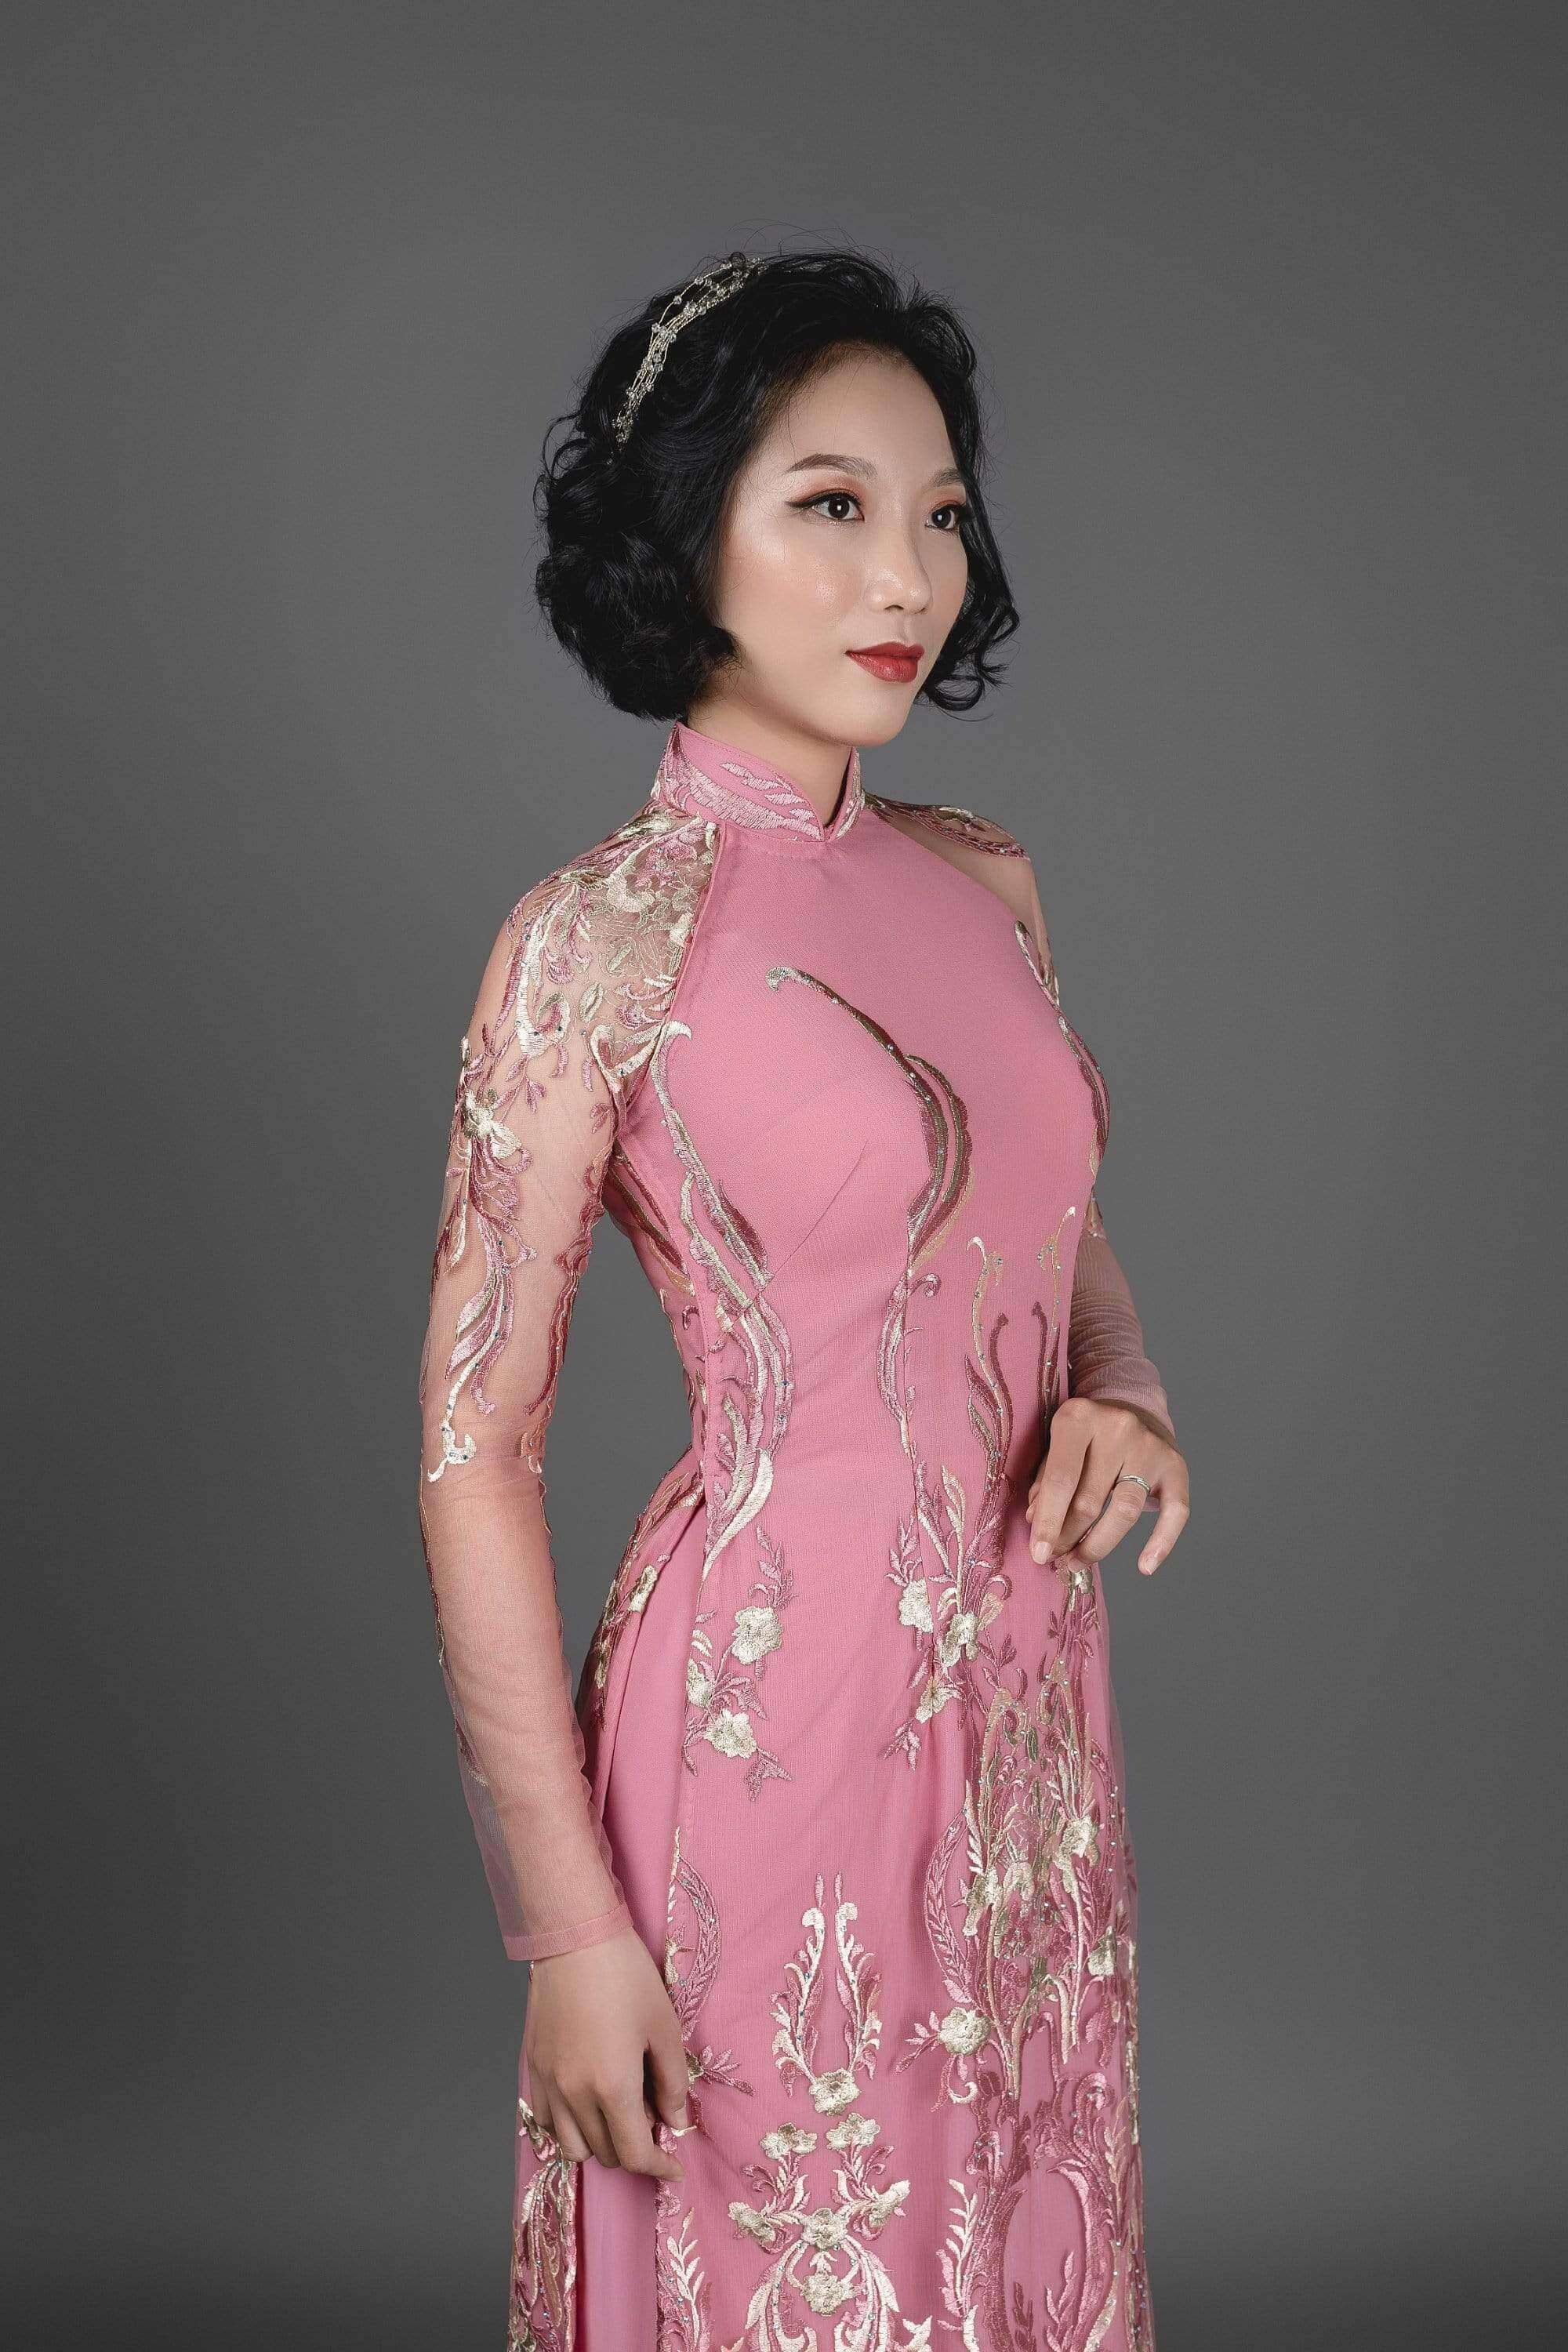 Only Sample US Size 4 - 30% Off - Vietnamese Ao Dai with pants